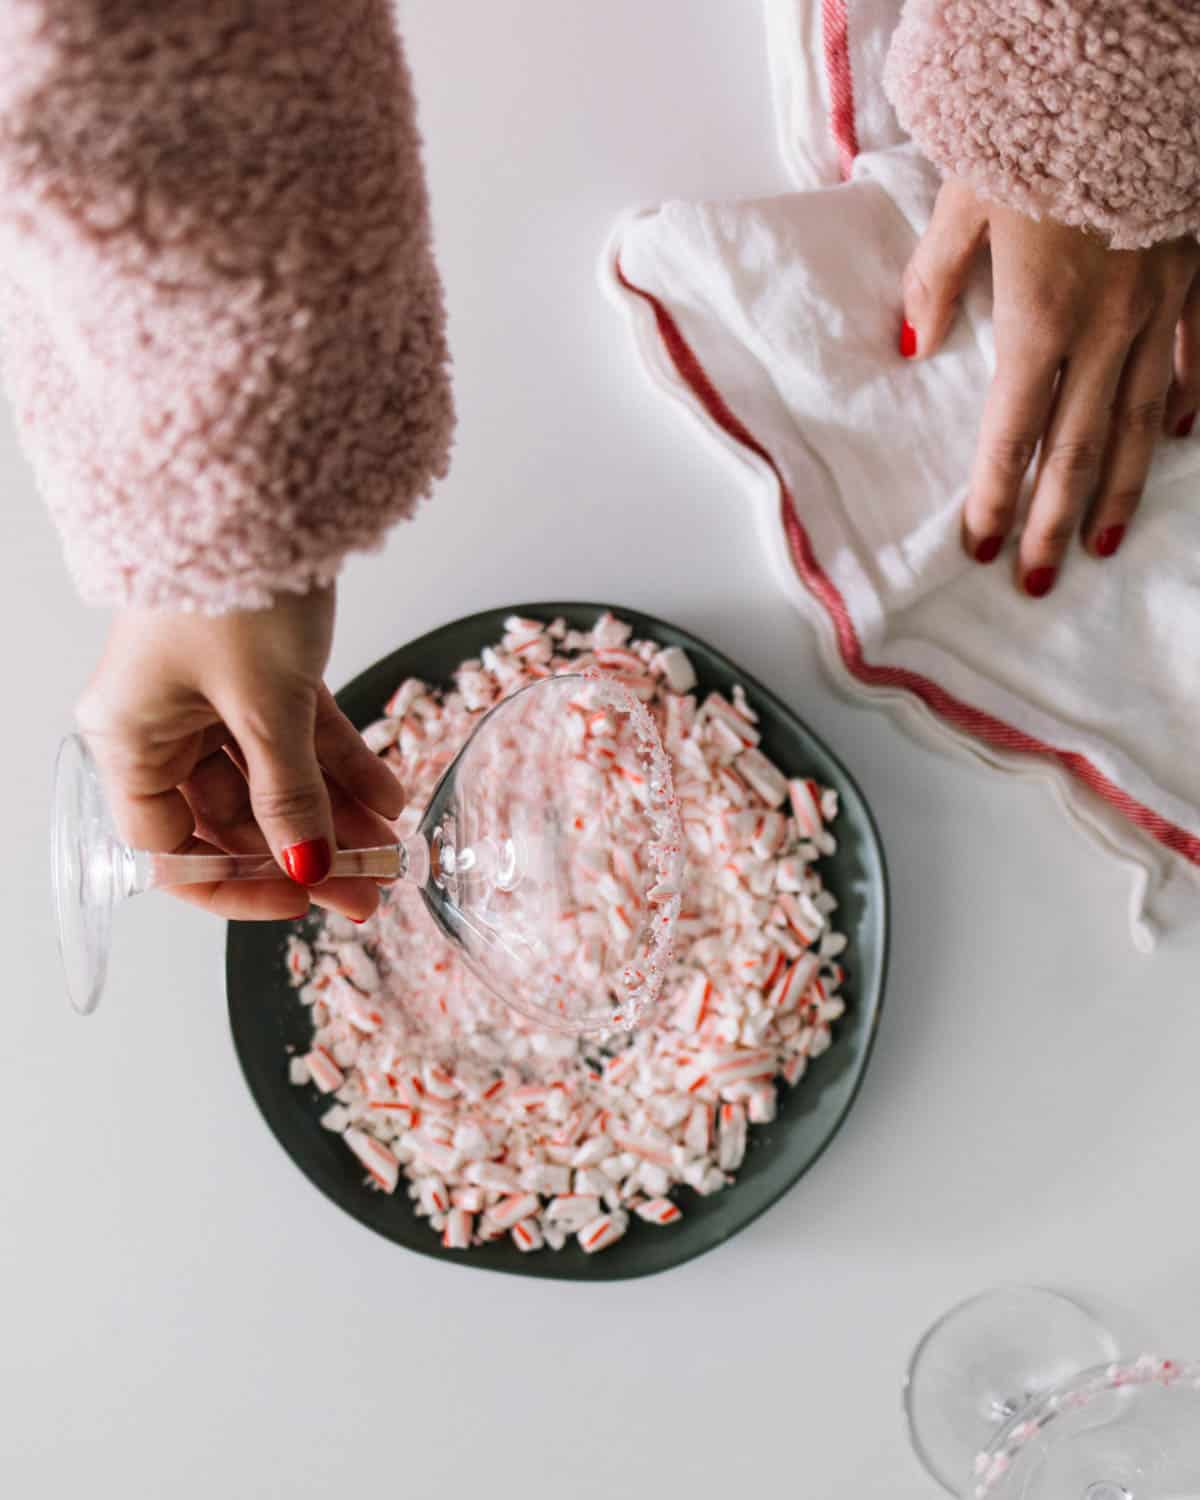 Crushed candy canes on a plate being used to rim a cocktail glass.